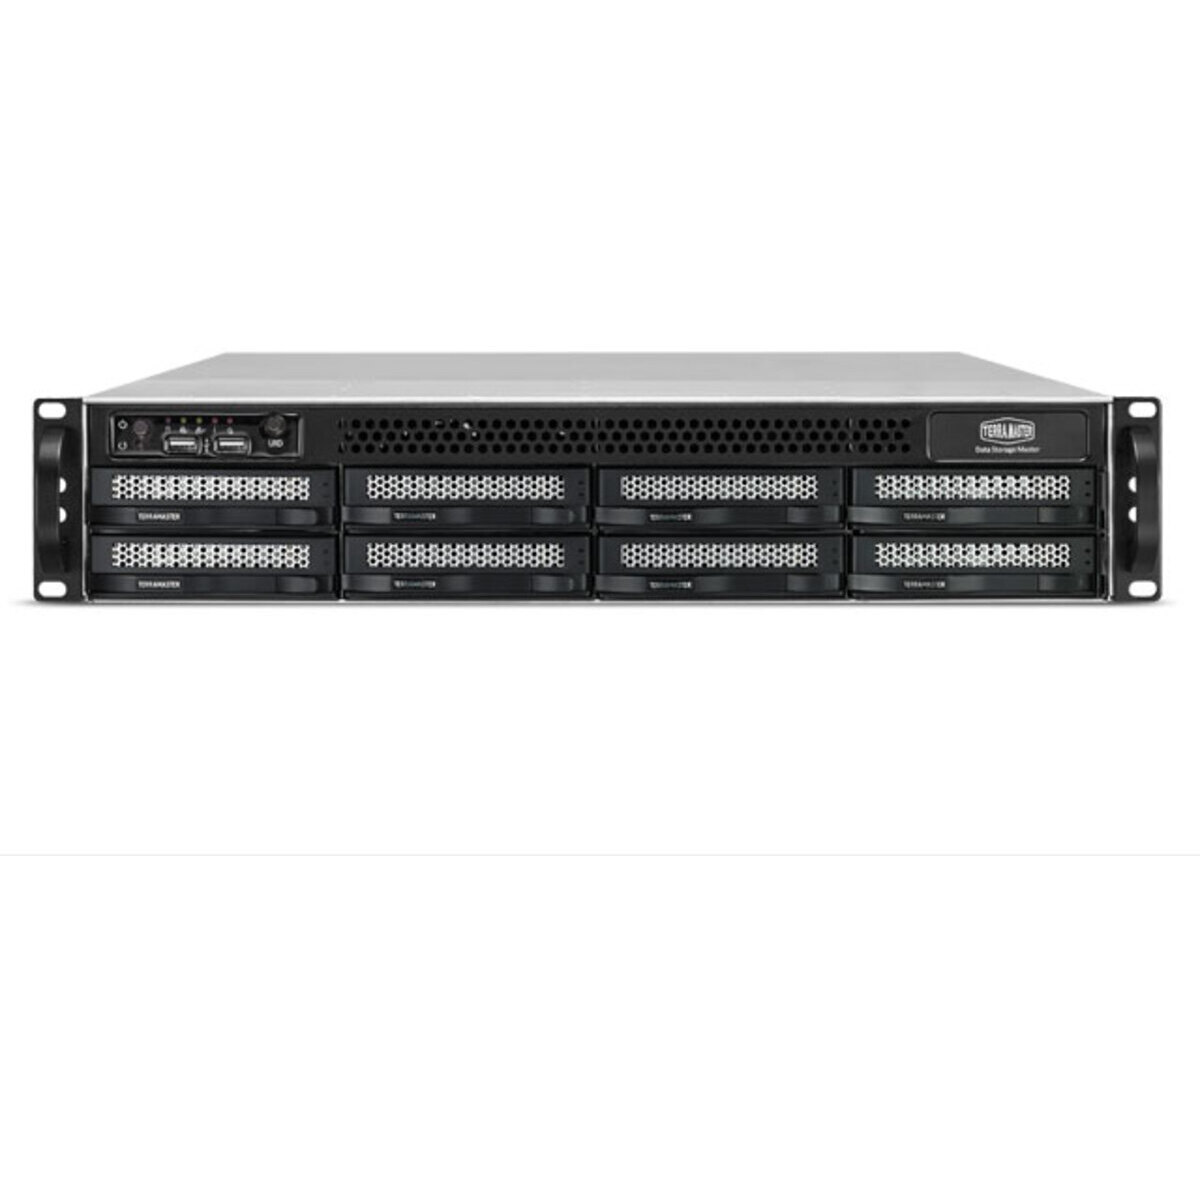 TerraMaster U8-522-9400 160tb 8-Bay RackMount Large Business / Enterprise NAS - Network Attached Storage Device 8x20tb Seagate EXOS X20 ST20000NM007D 3.5 7200rpm SATA 6Gb/s HDD ENTERPRISE Class Drives Installed - Burn-In Tested U8-522-9400